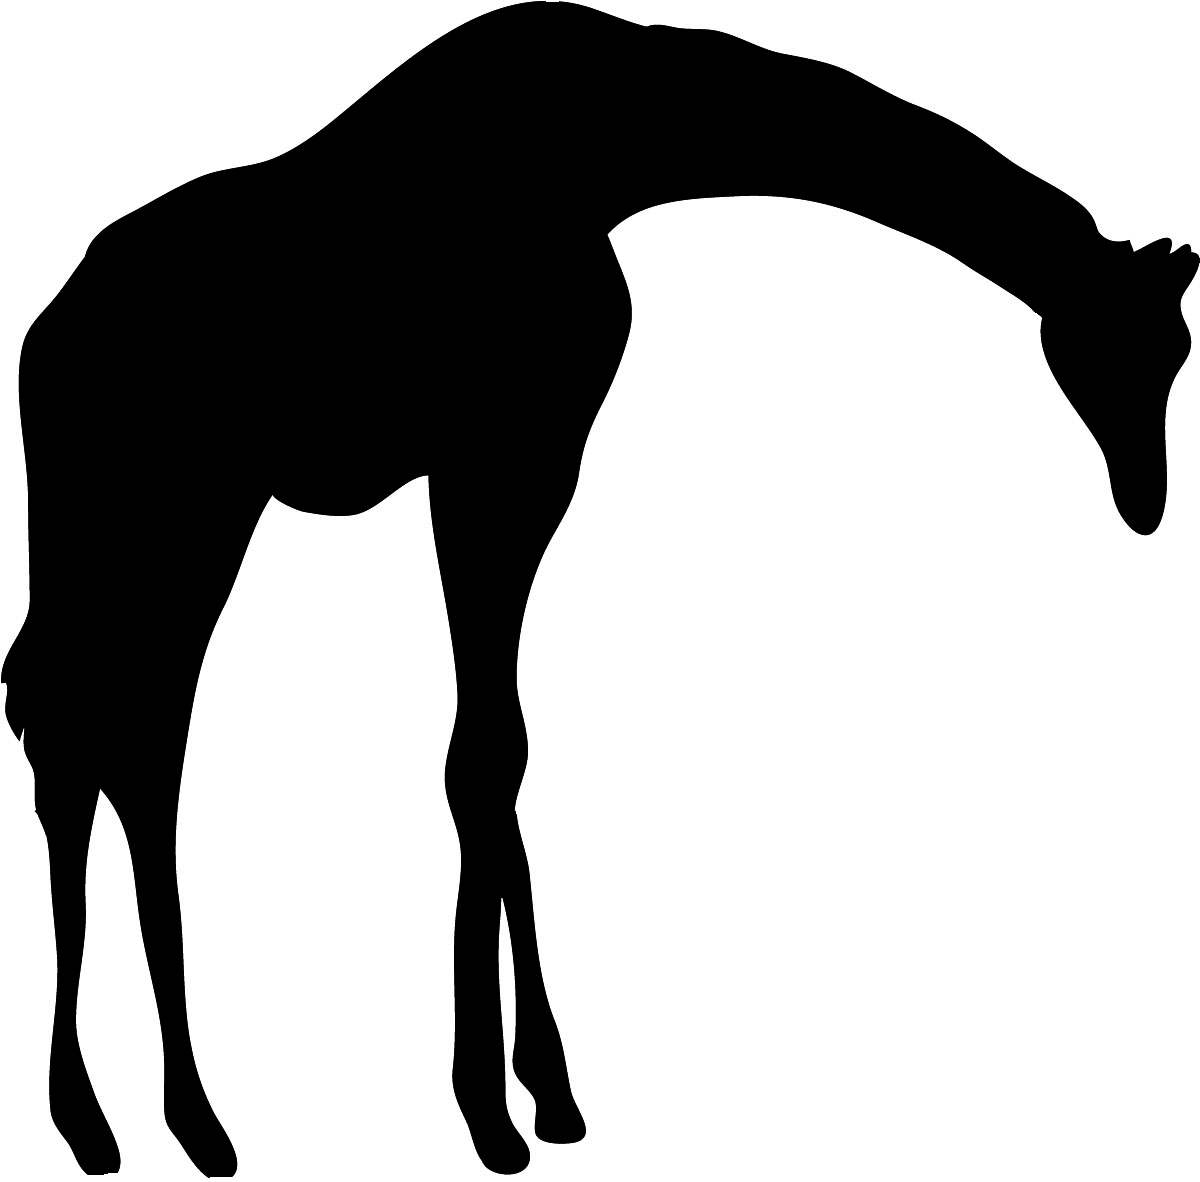 African animal silhouettes clipart - ClipartFox